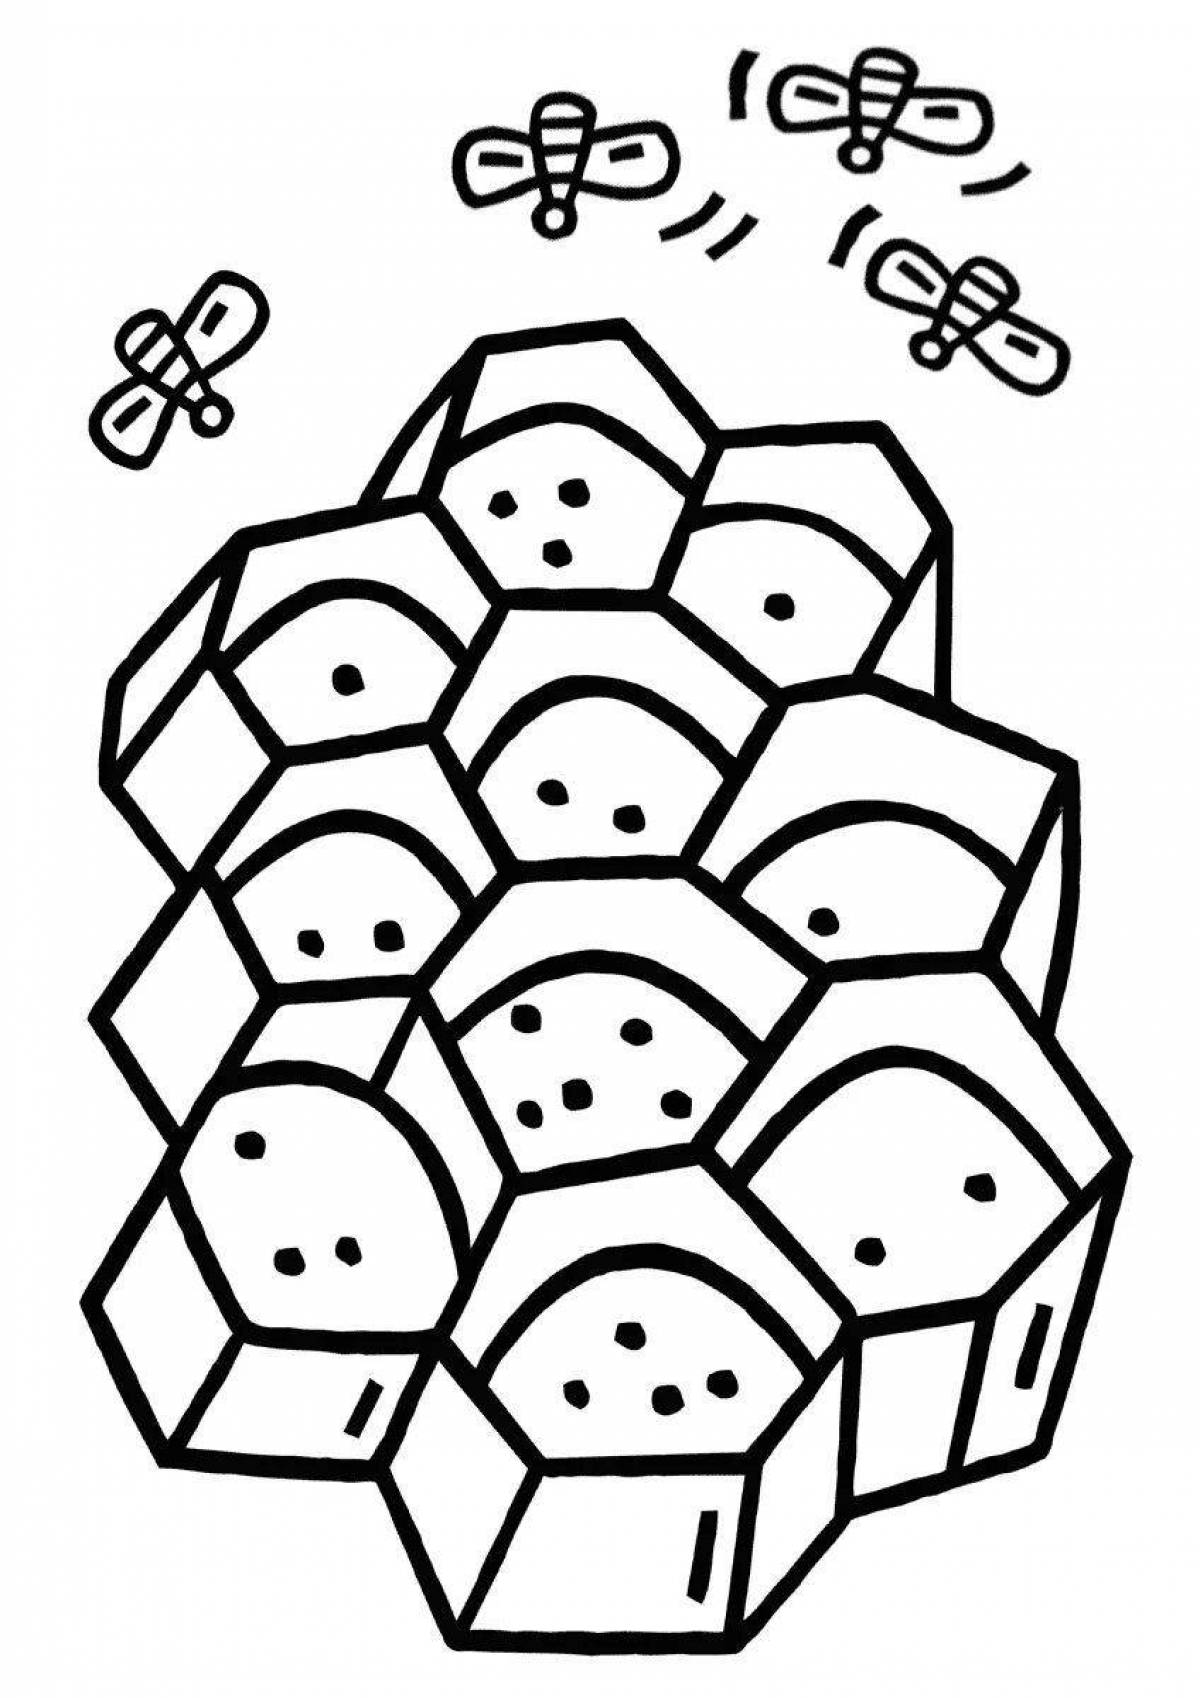 Flawless Honeycomb coloring book for preschoolers